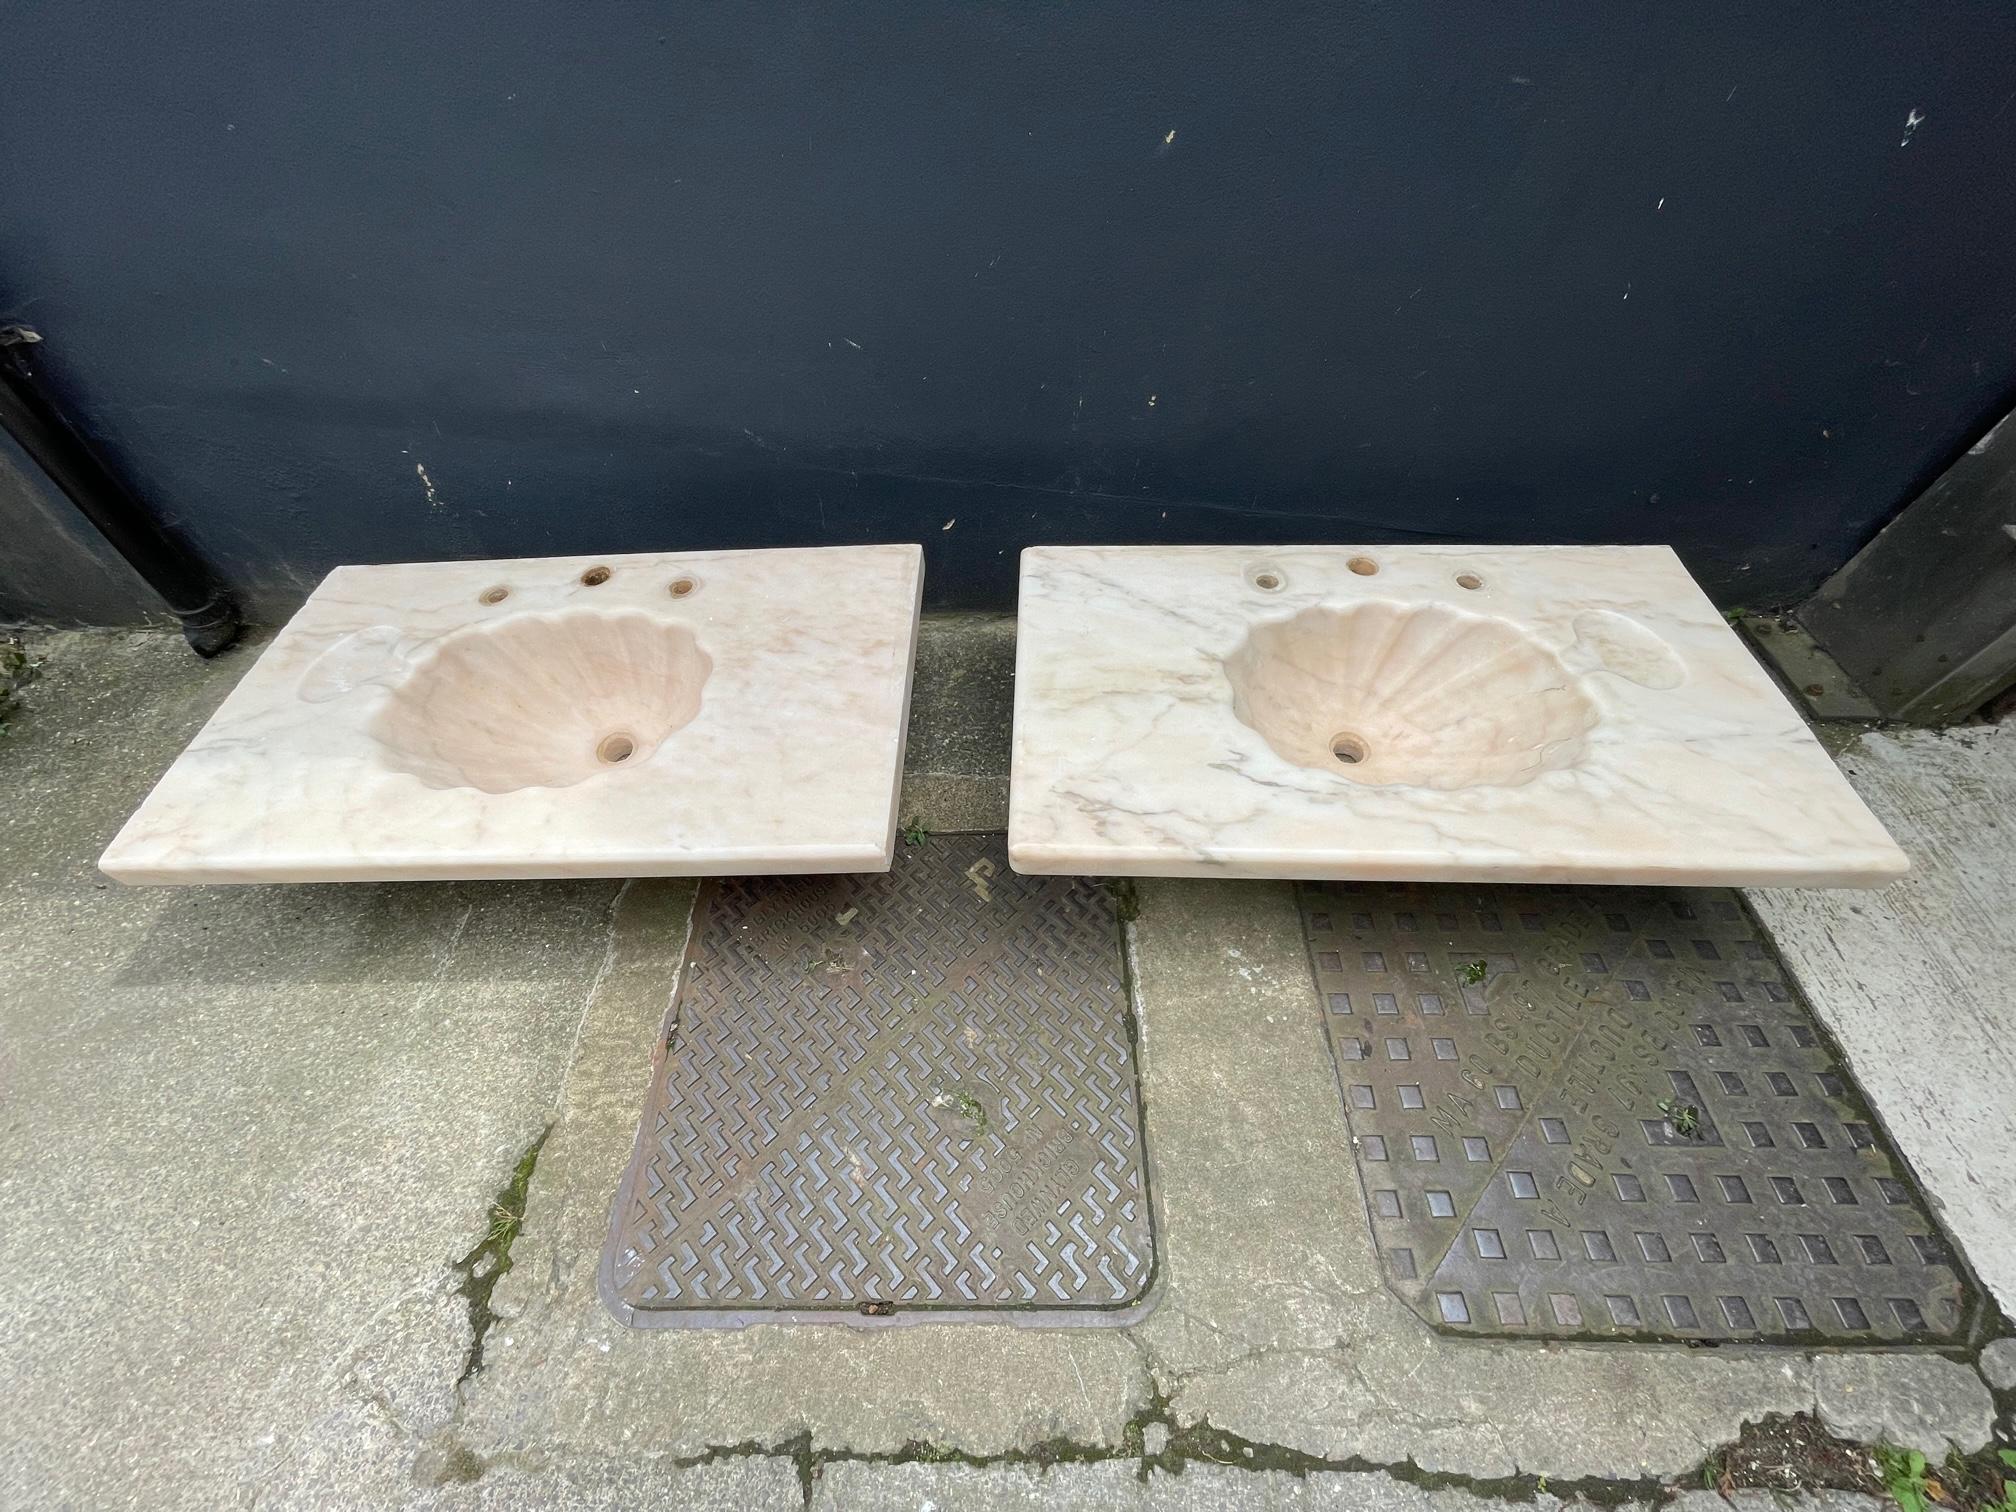 British Large Pair of Solid Marble Sink Basins and matching Toilet and Bidet